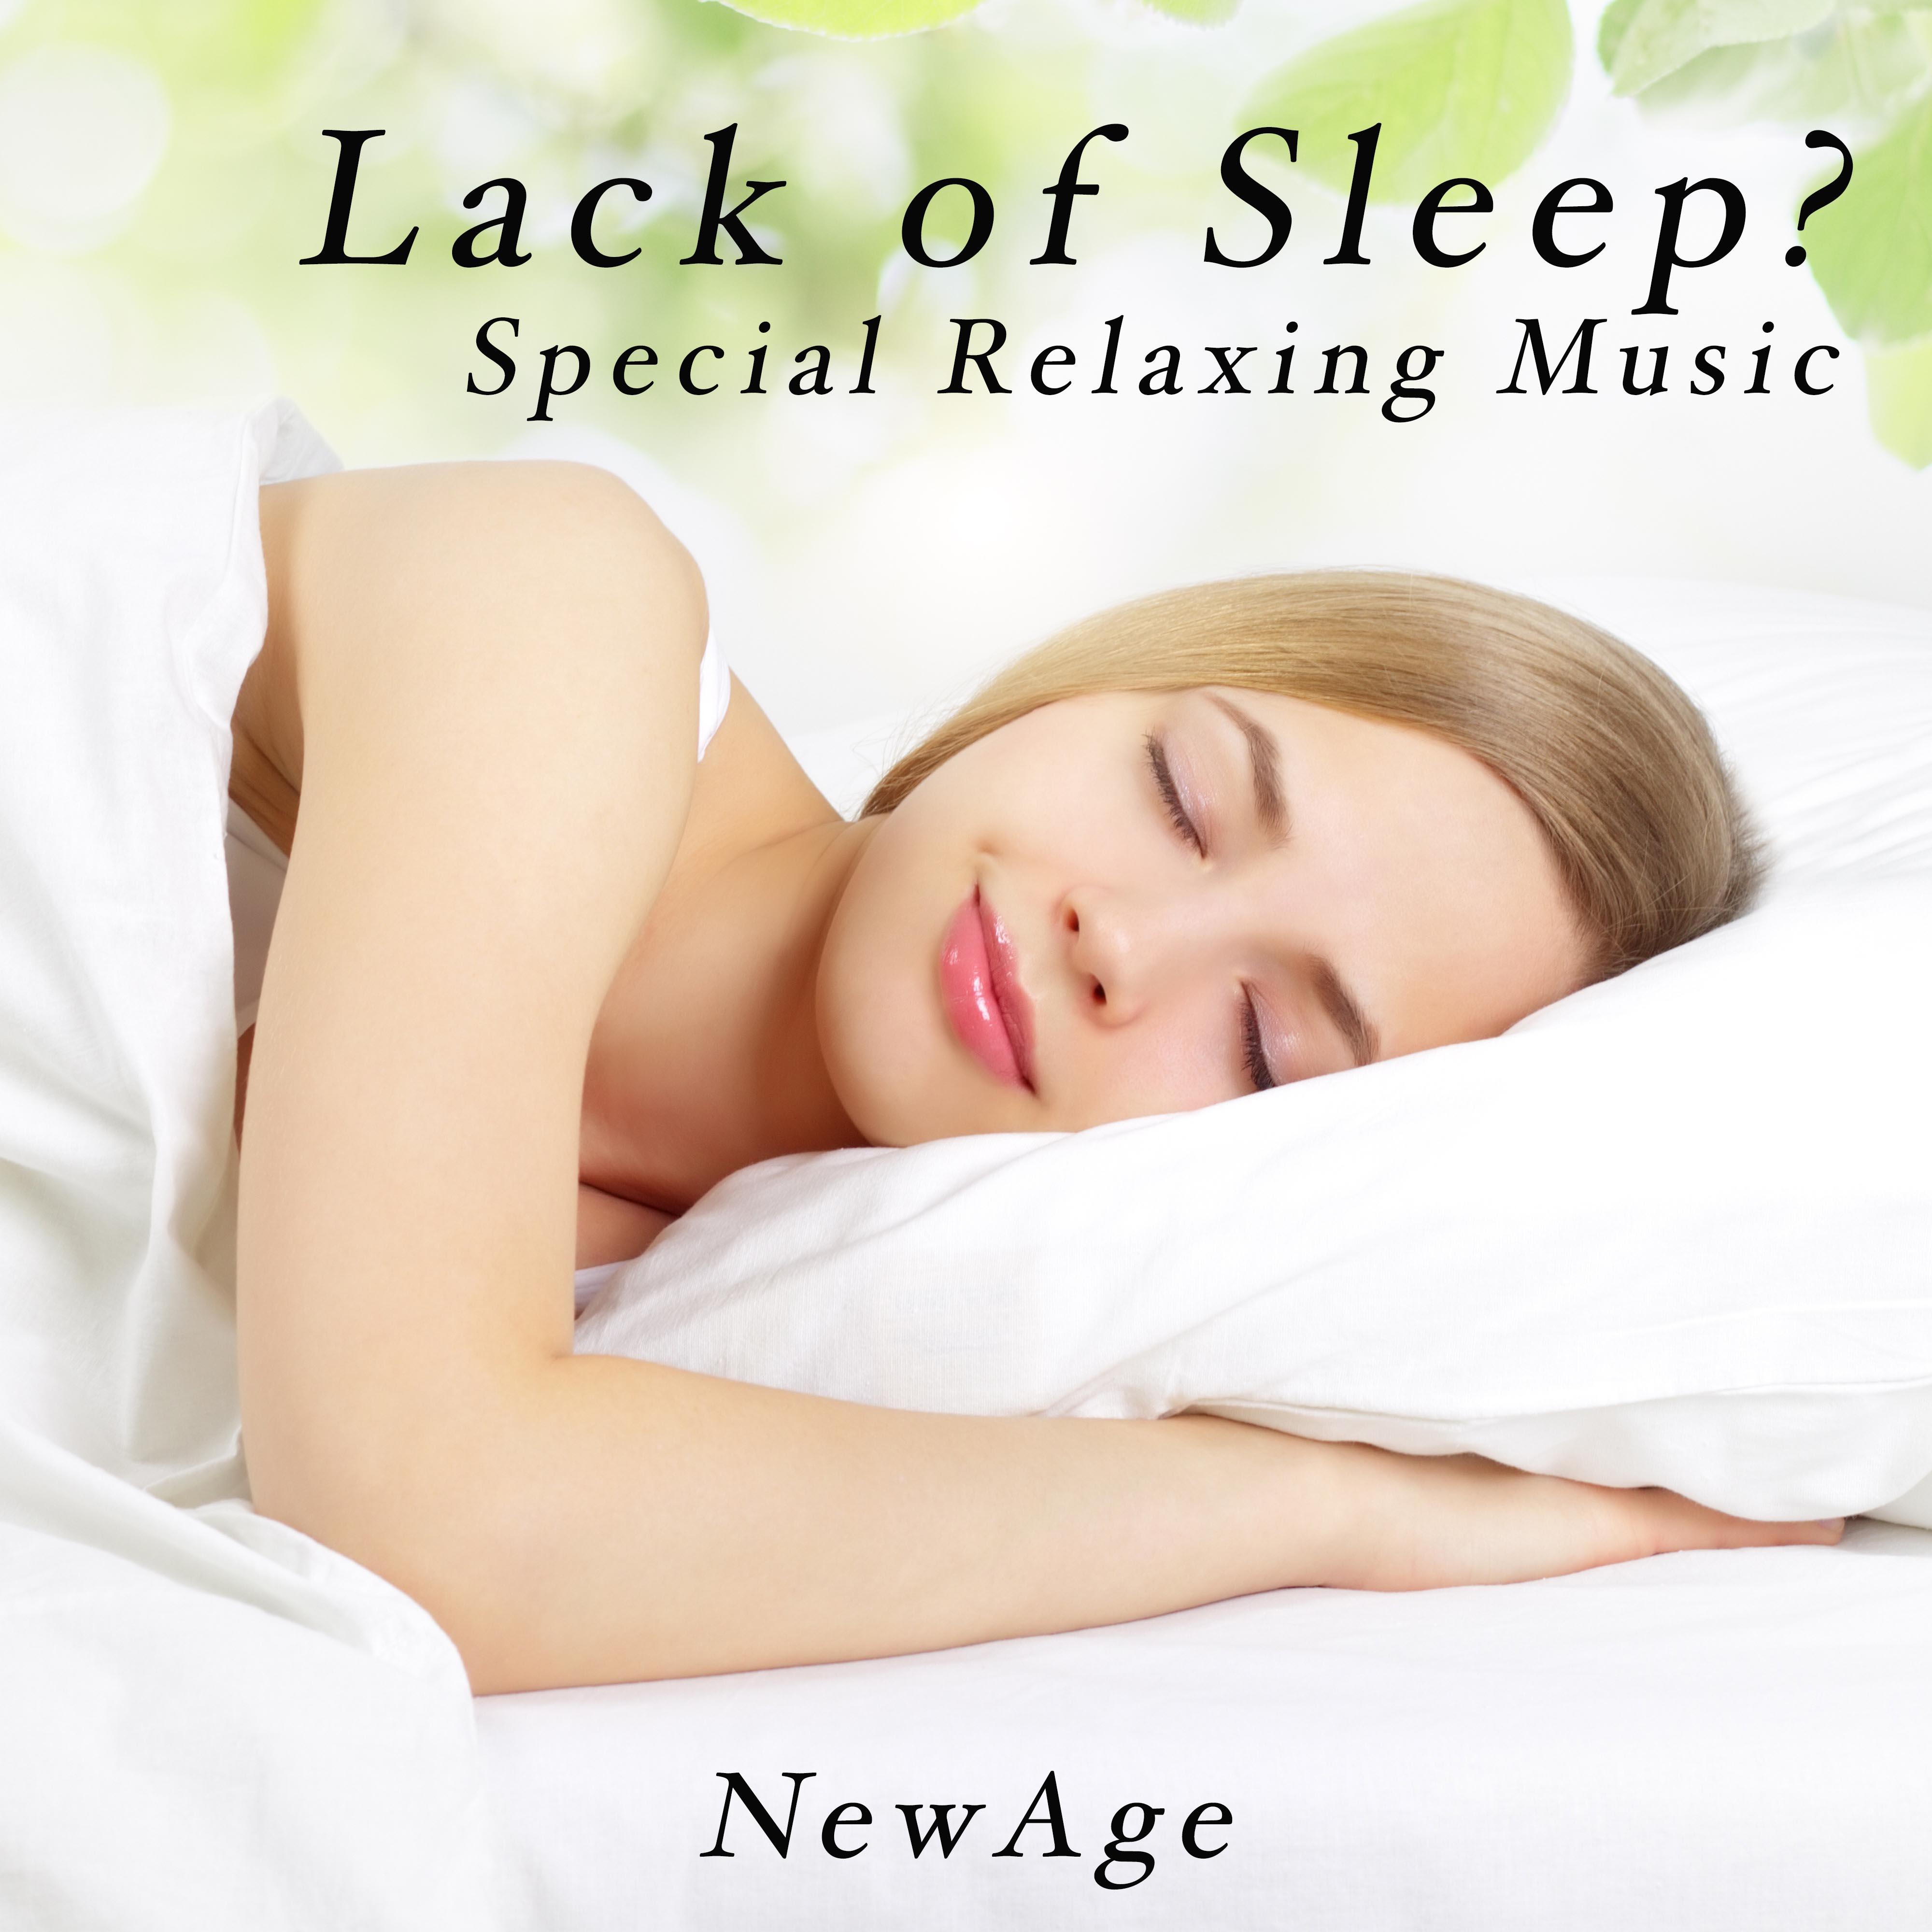 Lack of Sleep? Special Relaxing Music to Promote Sleep